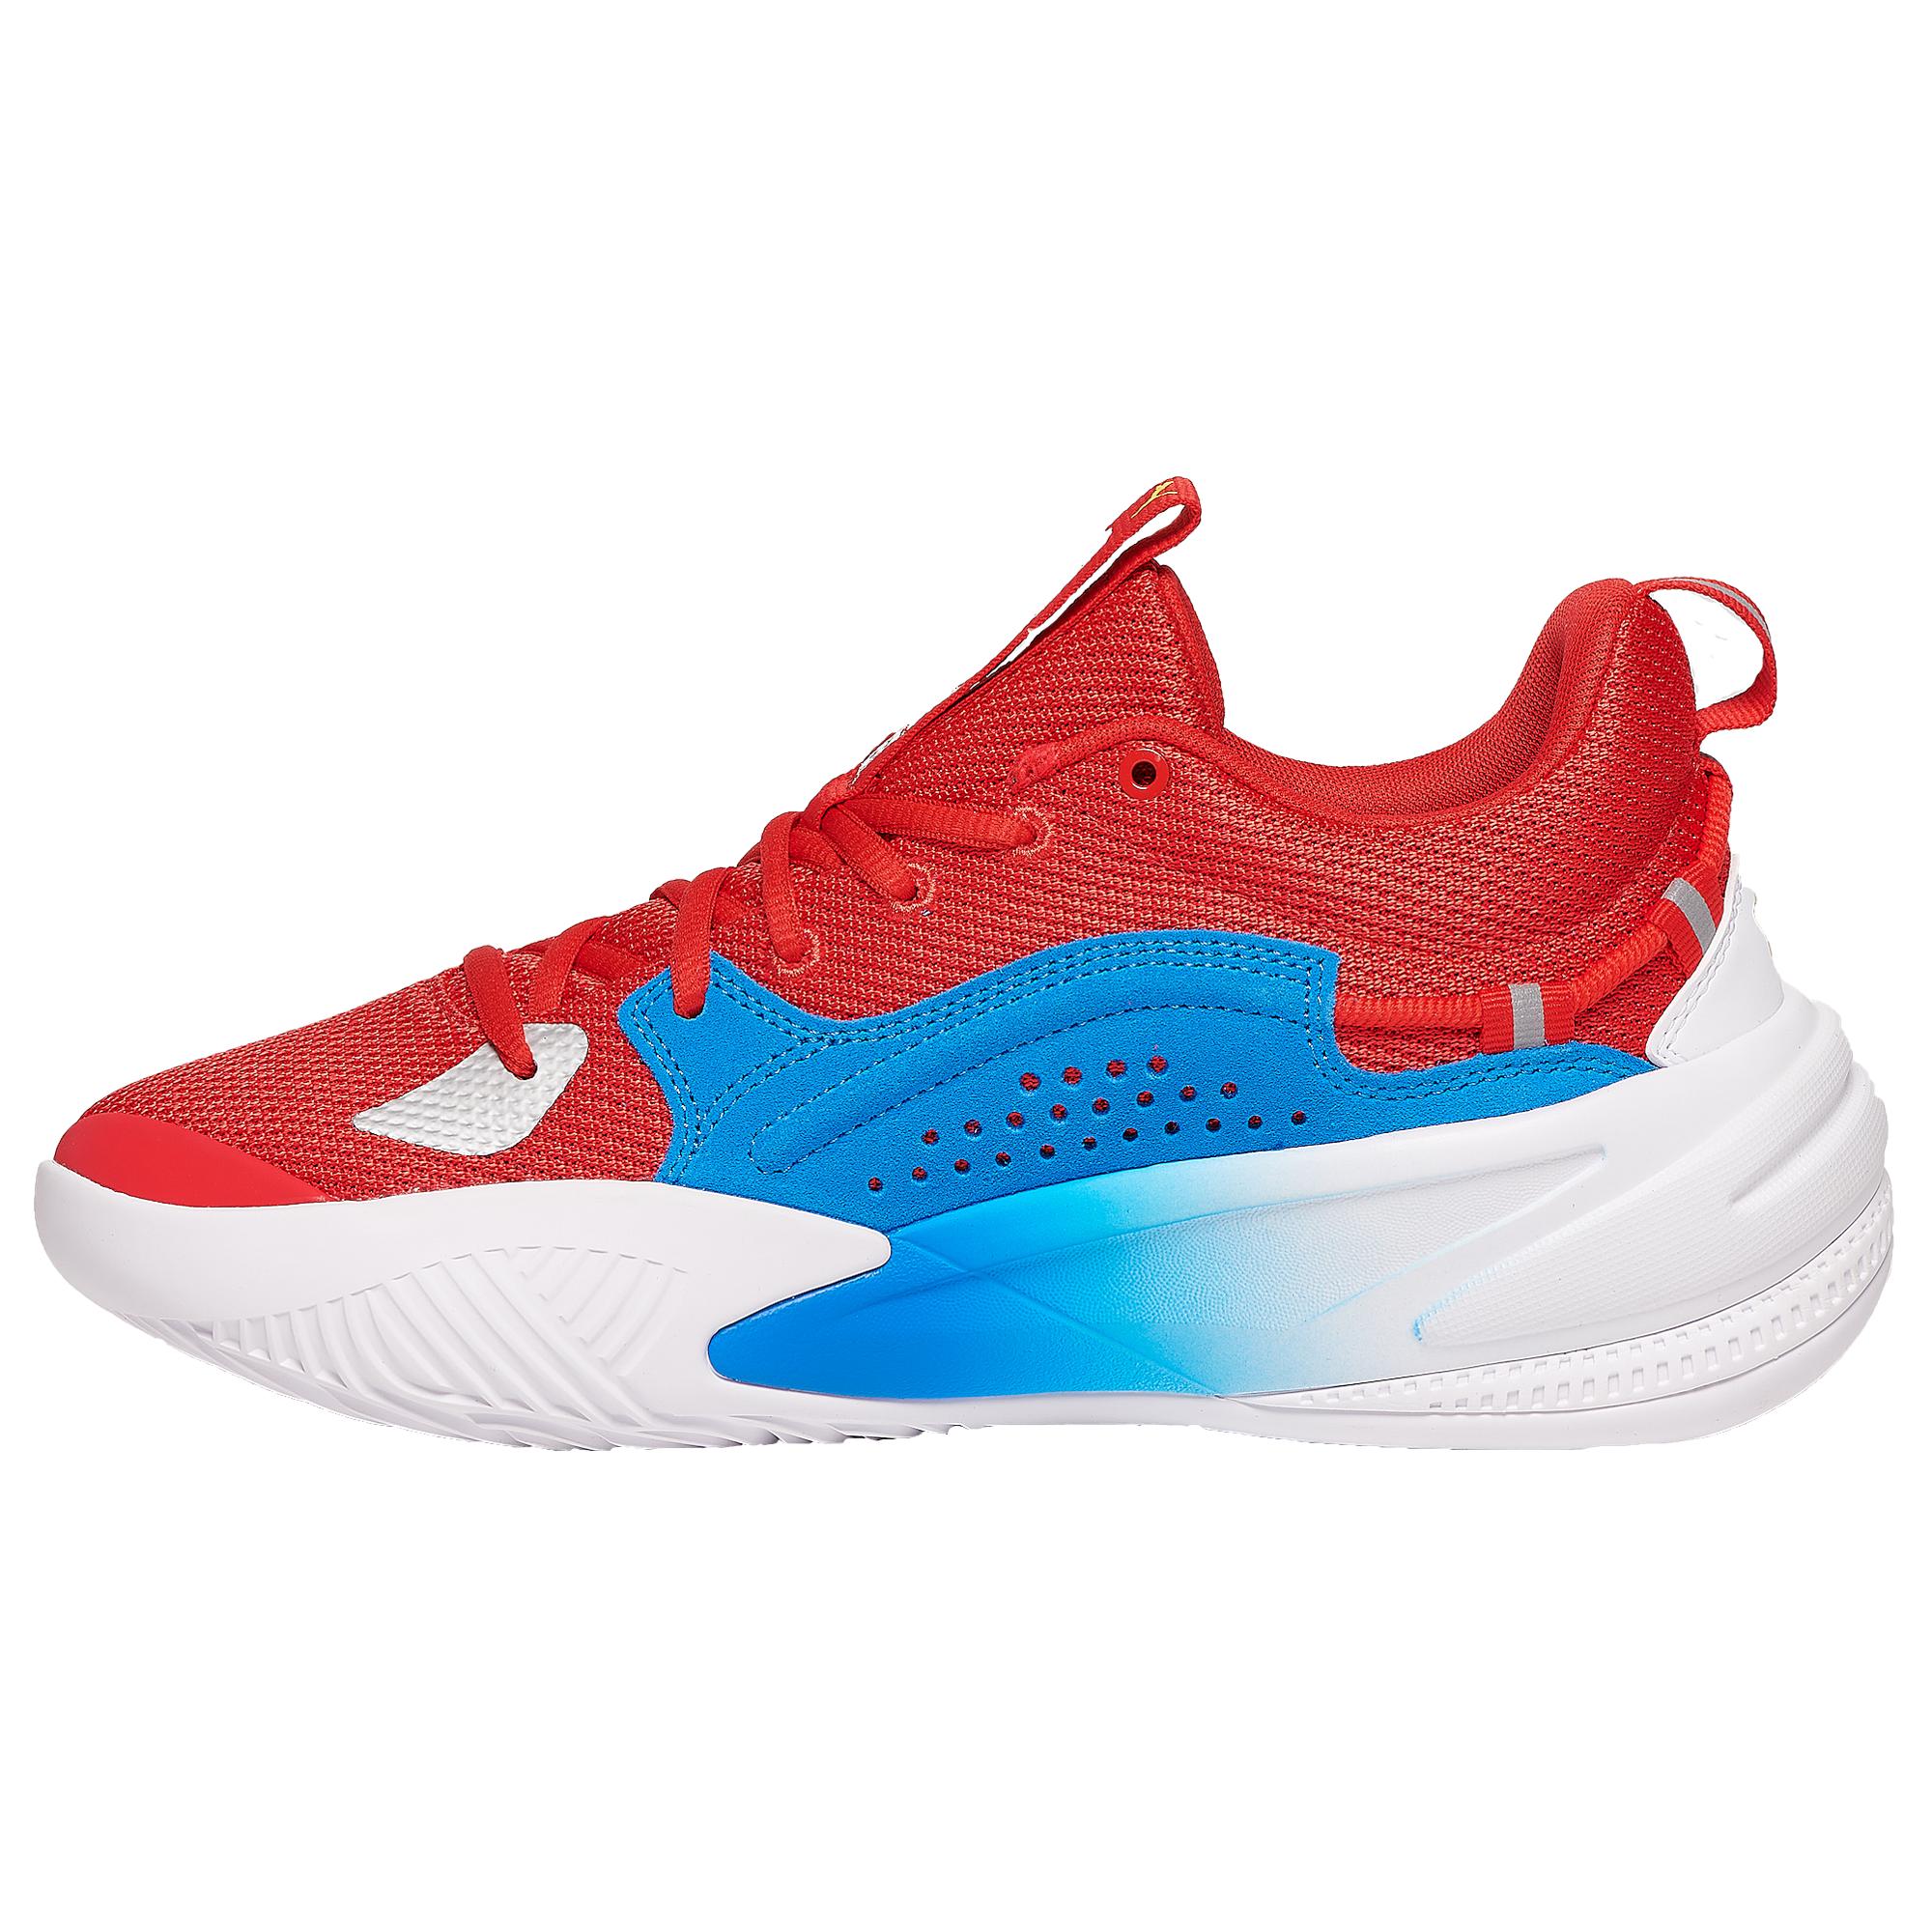 PUMA Rs Dreamer - Basketball Shoes in Red/Blue/Yellow (Red) for Men - Lyst